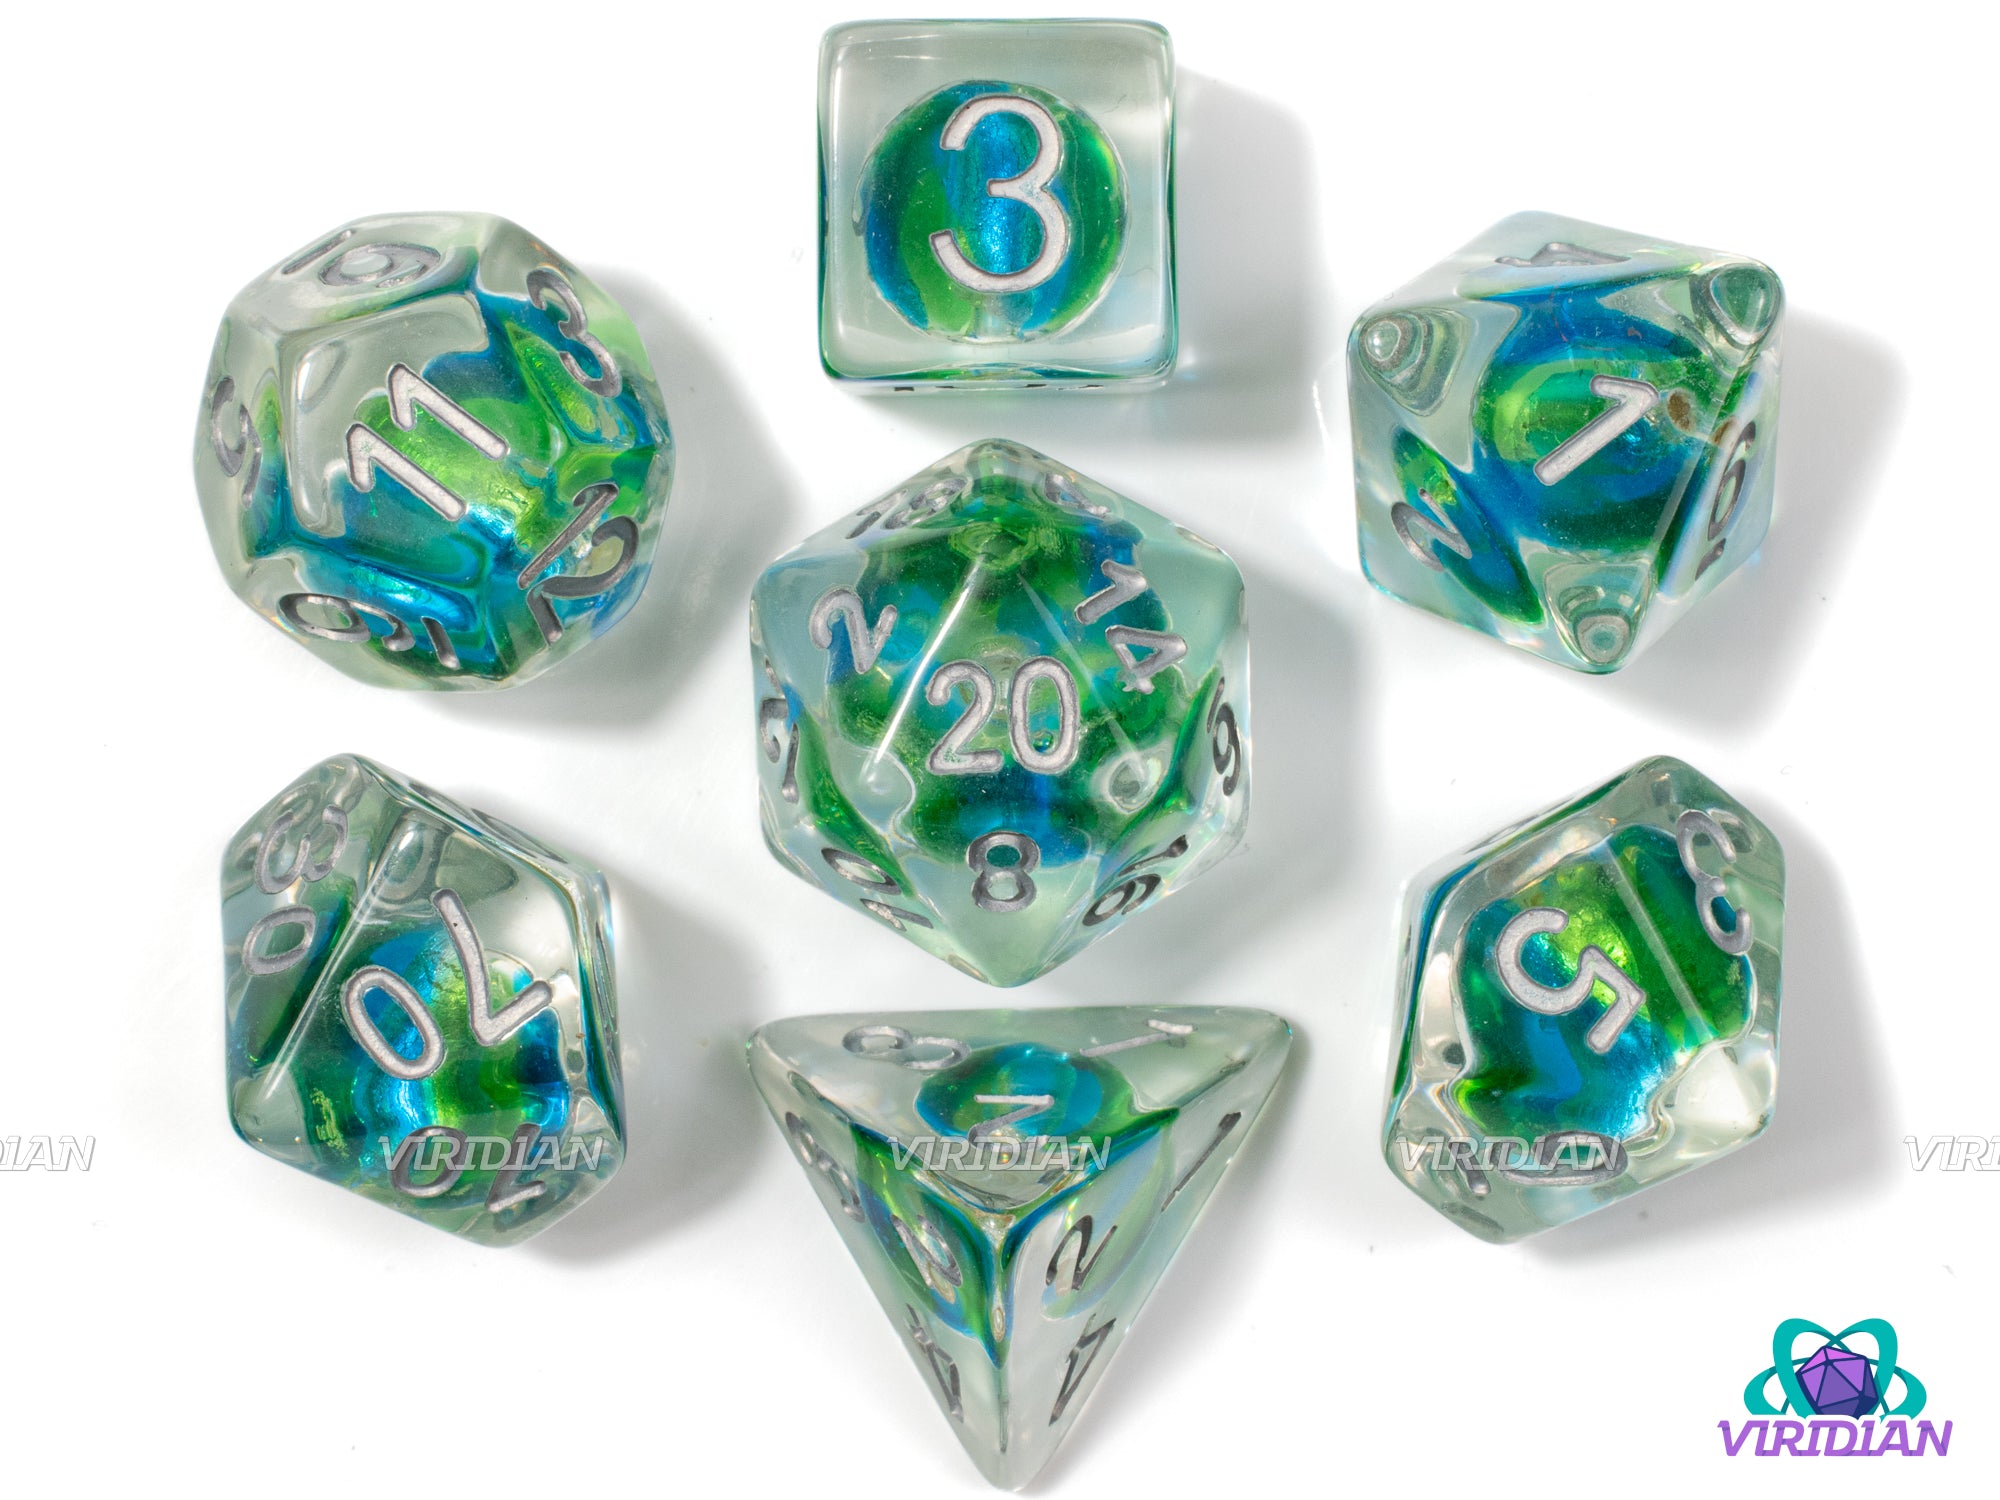 Earthsphere | Light Blue & Green Bead Inclusion, Clear, Silver Ink | Resin Dice Set (7)